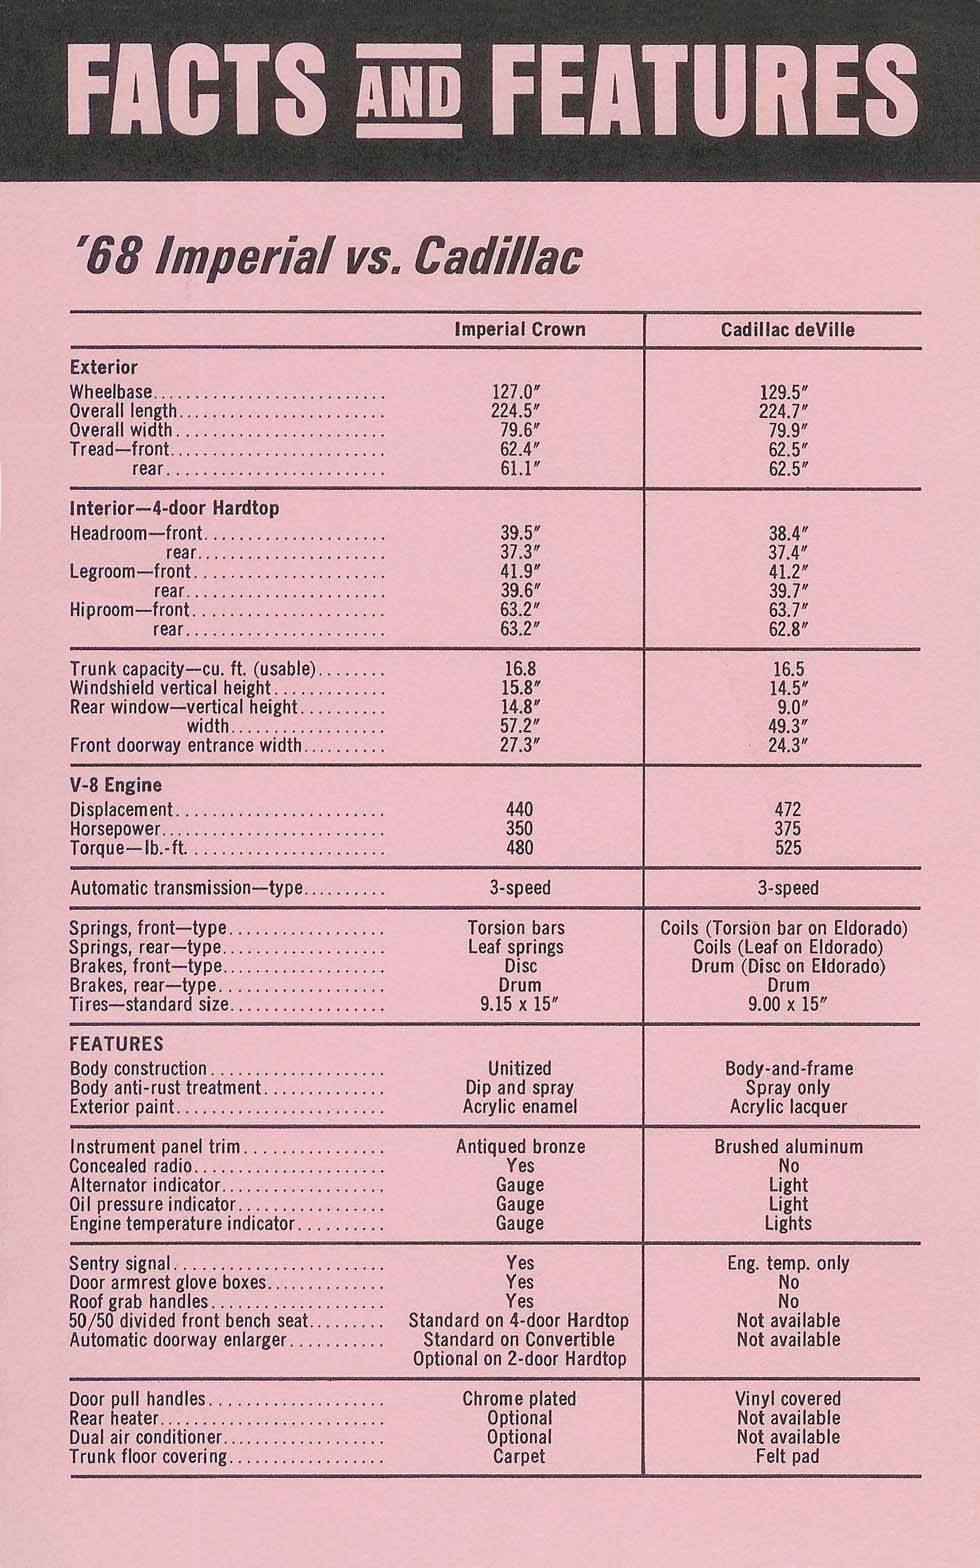 1968 Chrysler Imperial Comparison Facts And Features Folder Page 2